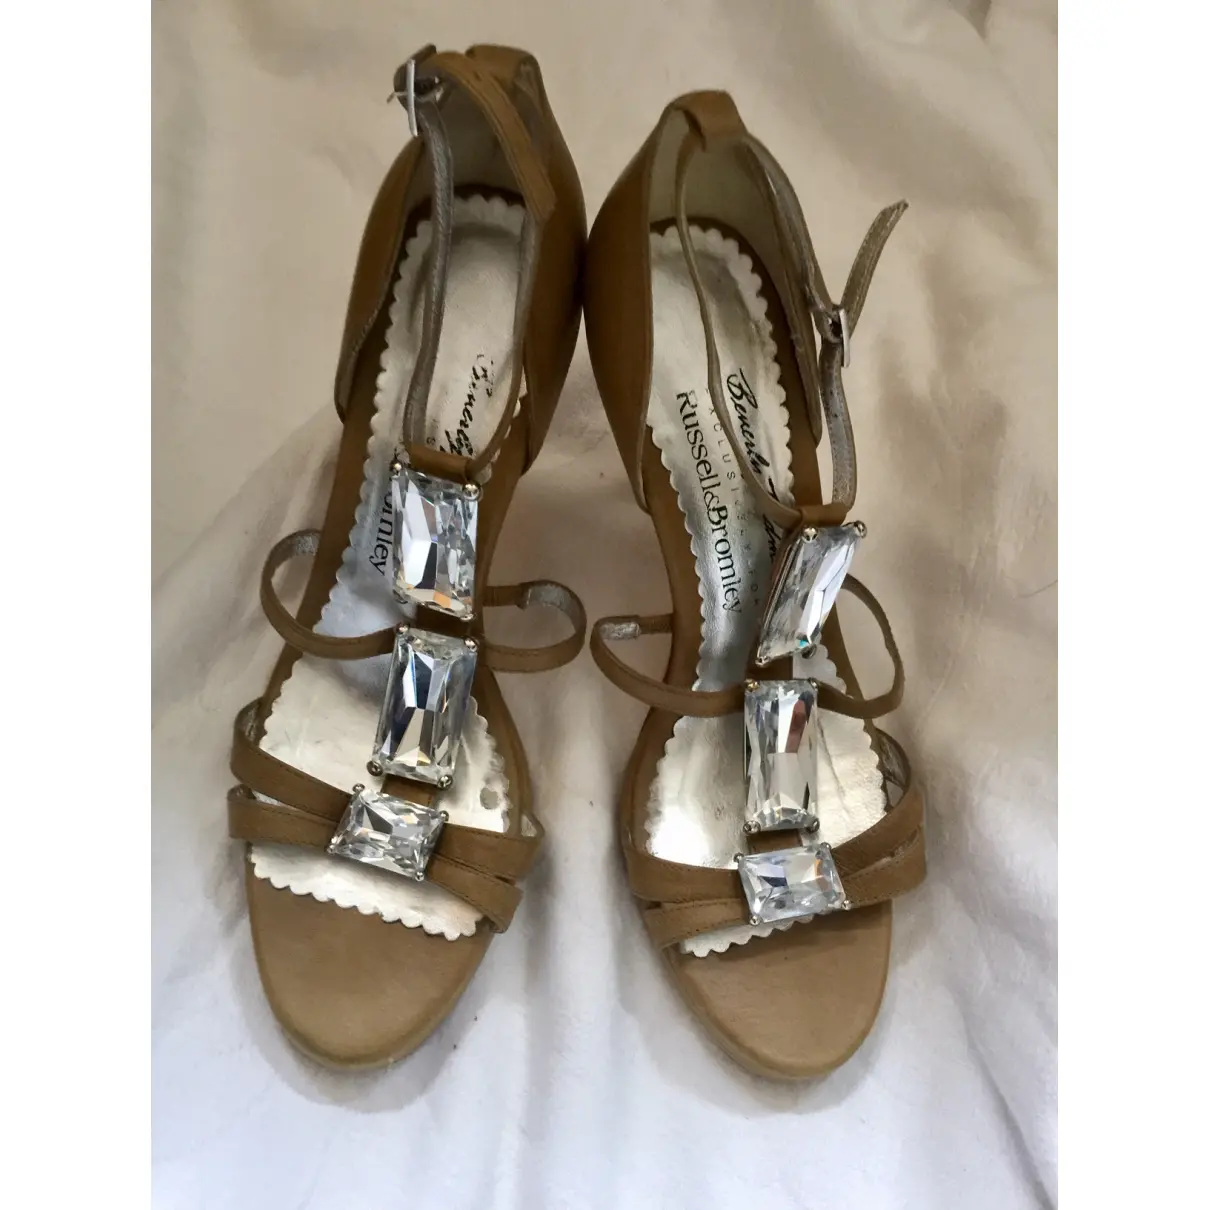 Buy Russell & Bromley Leather sandals online